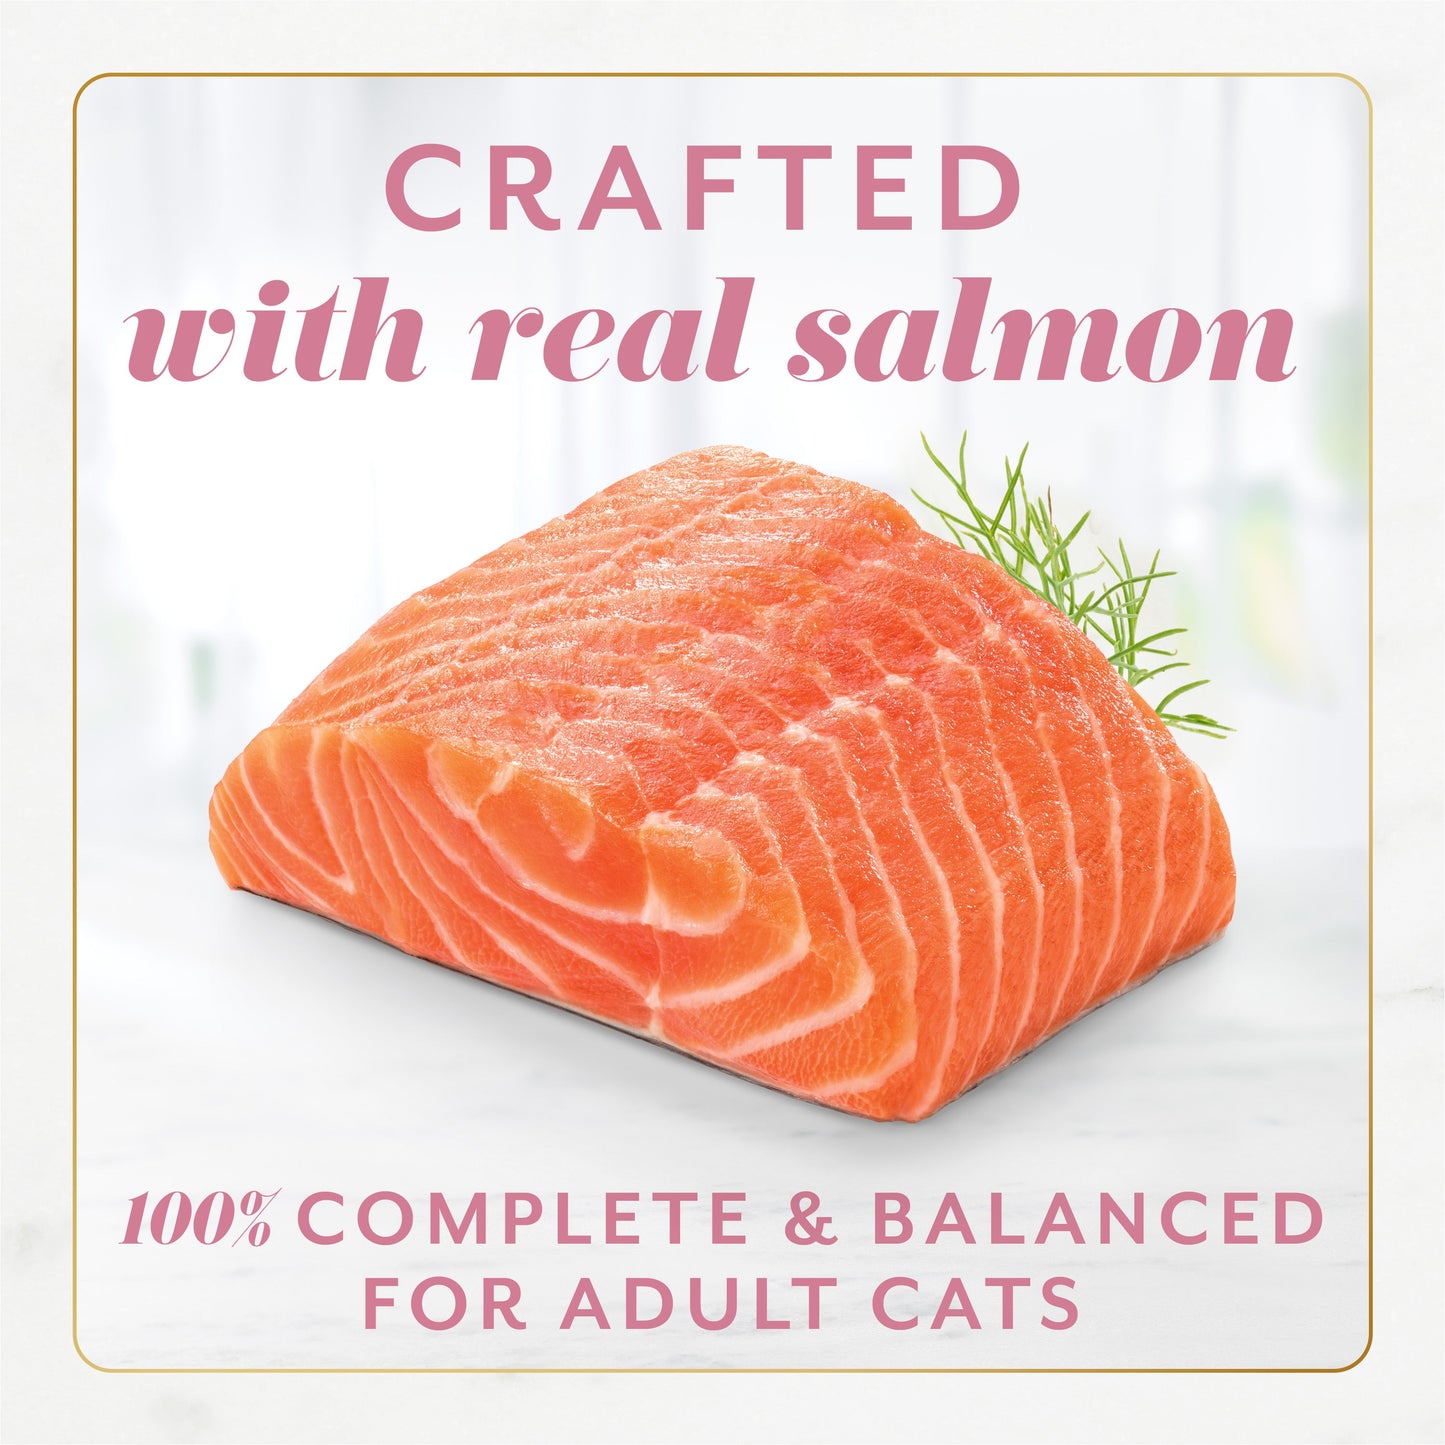 Crafted with real salmon. 100% complete and balanced for adult cats